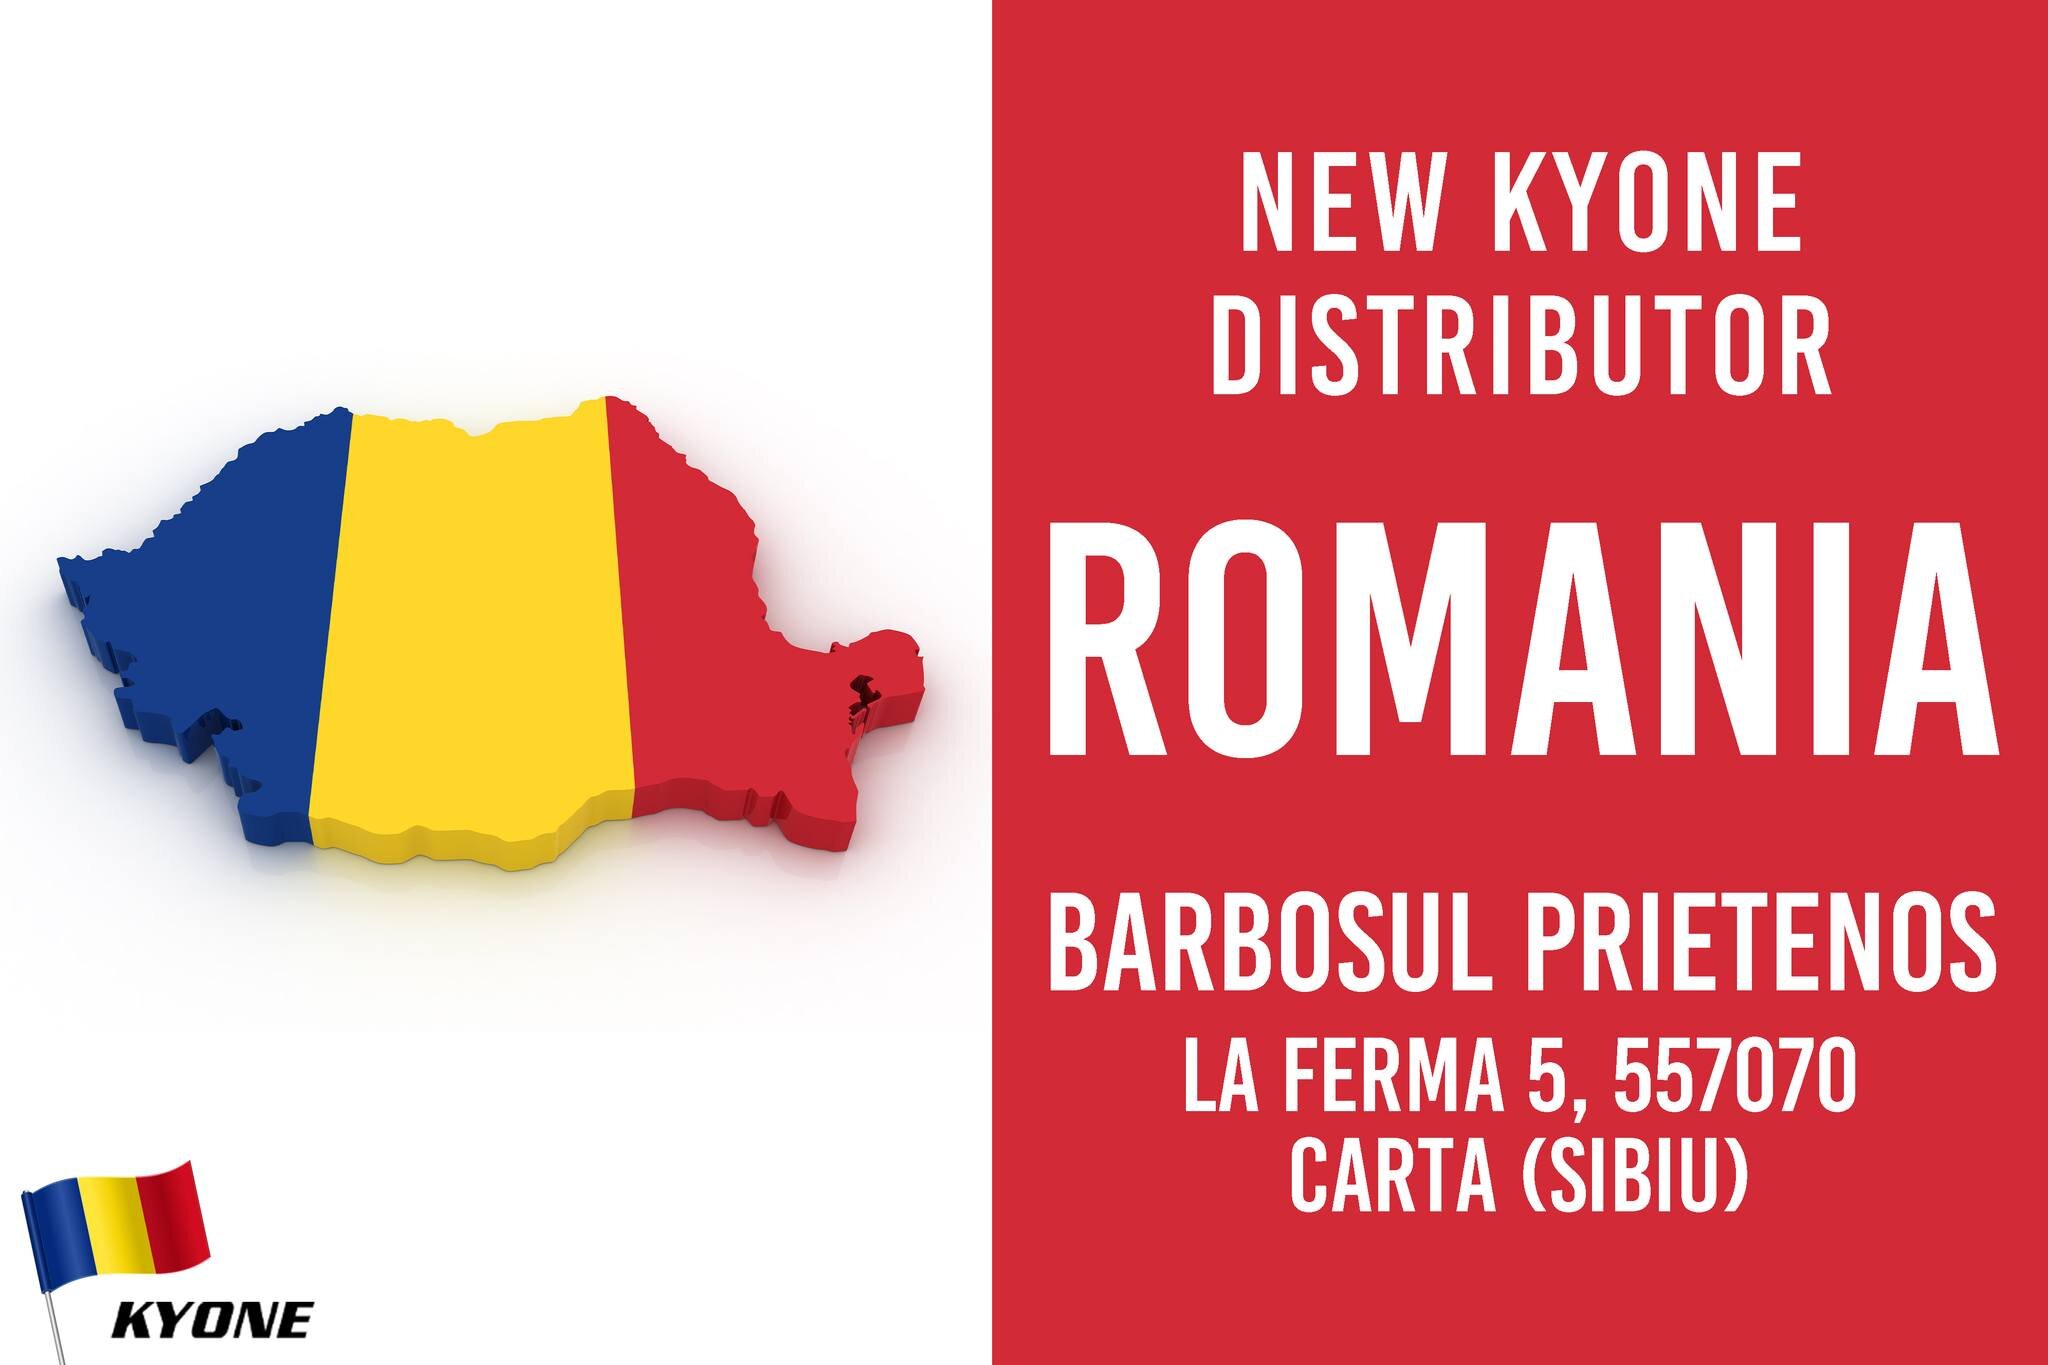 🇷🇴🇷🇴🇷🇴🇷🇴🇷🇴
⁣⁣
Happy and proud to introduce our newest Kyone distributor in ROMANIA: @barbosulprietenos🤩💥⁣⁣
⁣⁣
👉 Check out their website for more information: https://www.barbosulprietenos.ro/ 
⁣⁣
Visit our website to find your local deal